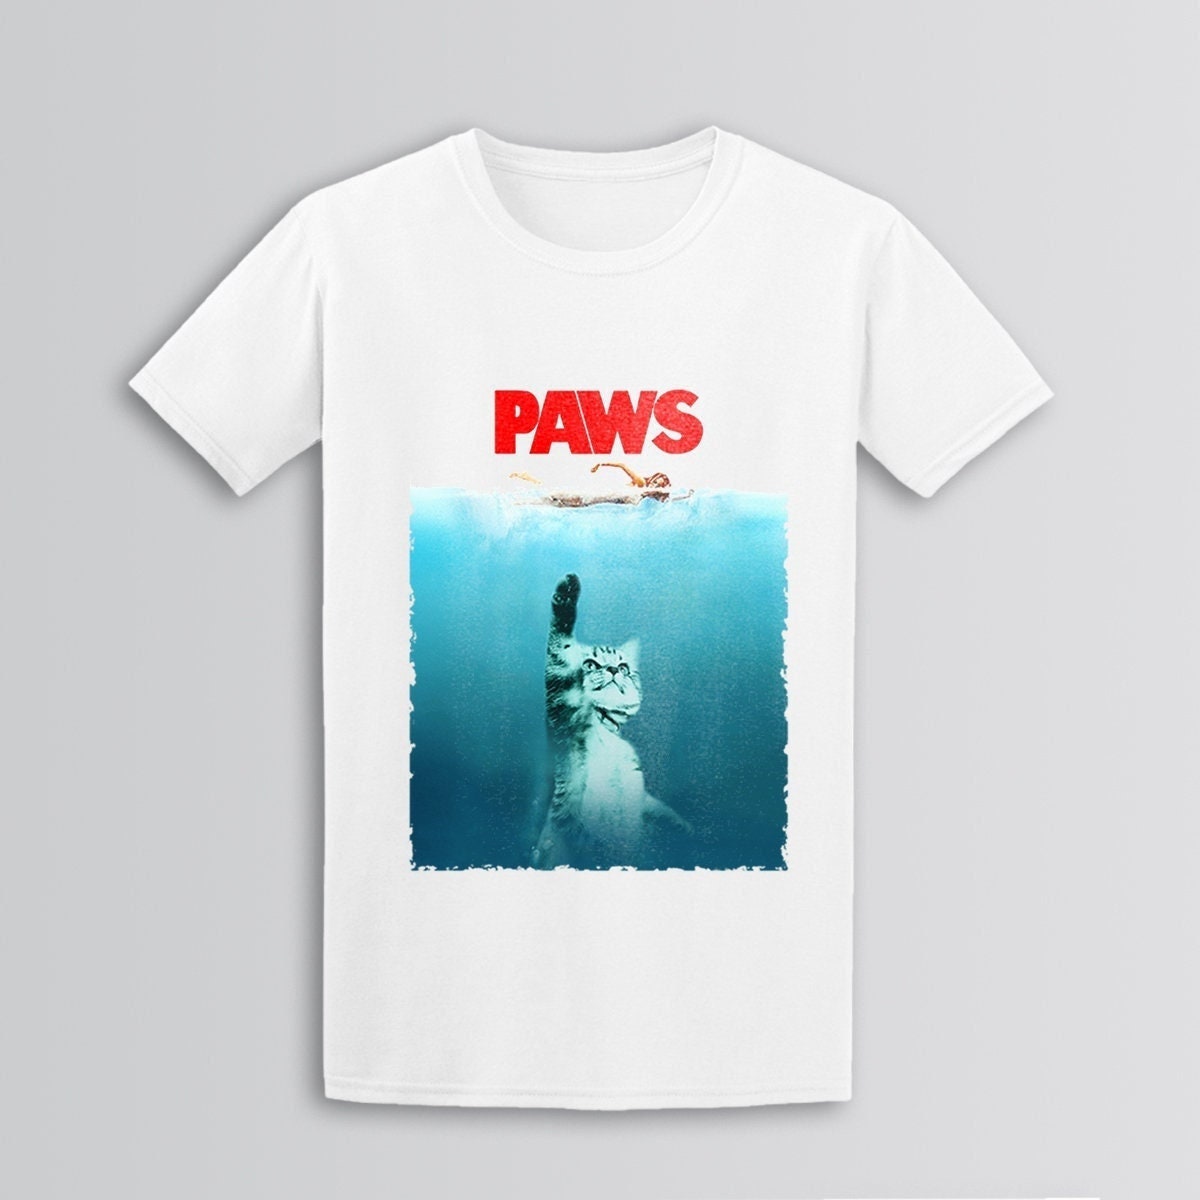 Discover Jaws PAWS Parody Graphic T-Shirts